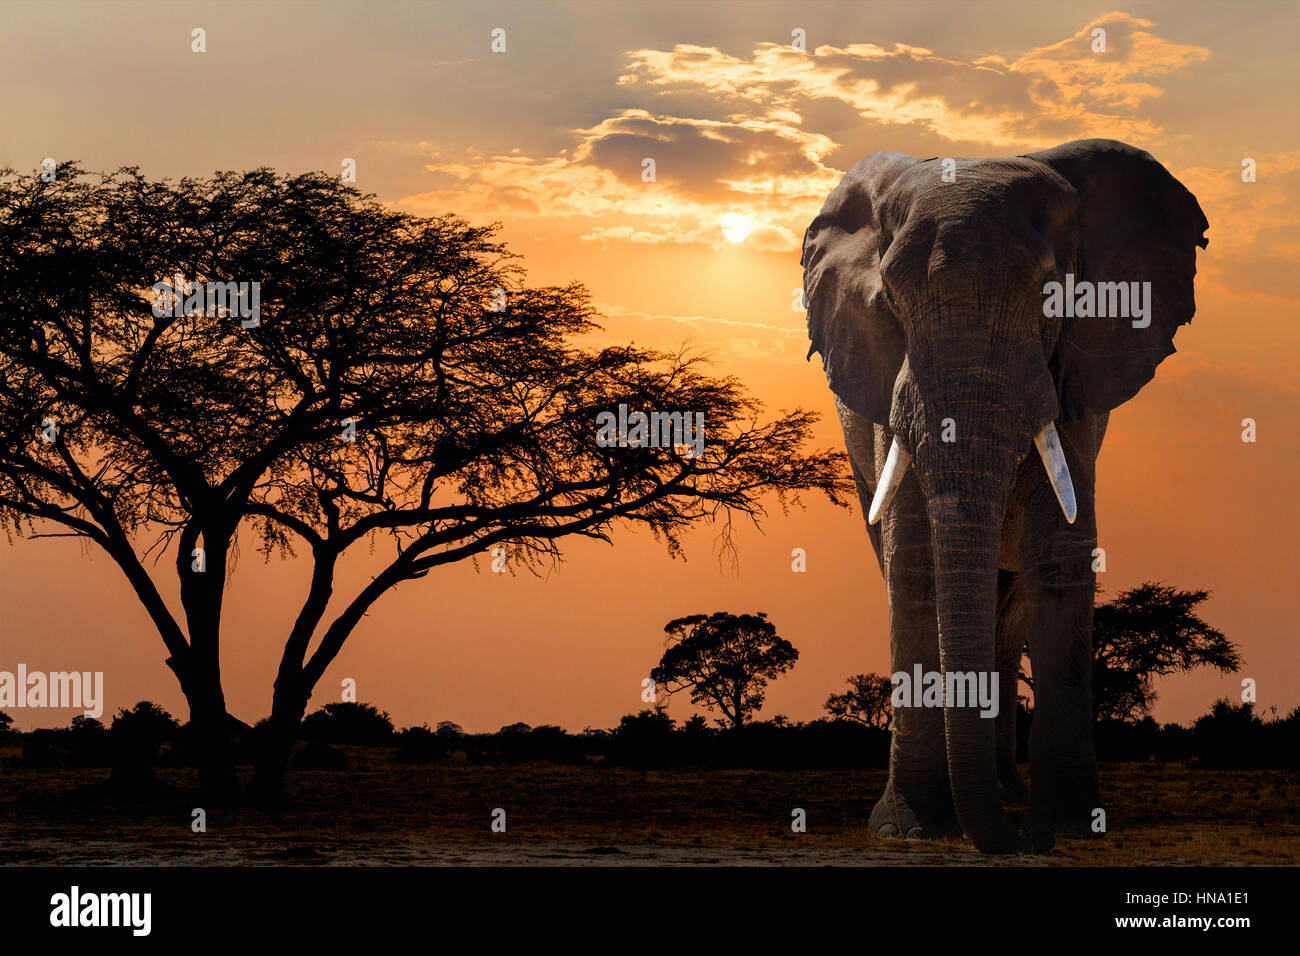 sunset over acacia tree and African elephant. Africa safari wildlife and wilderness. Beautiful nature african scene Stock Photo Alamy